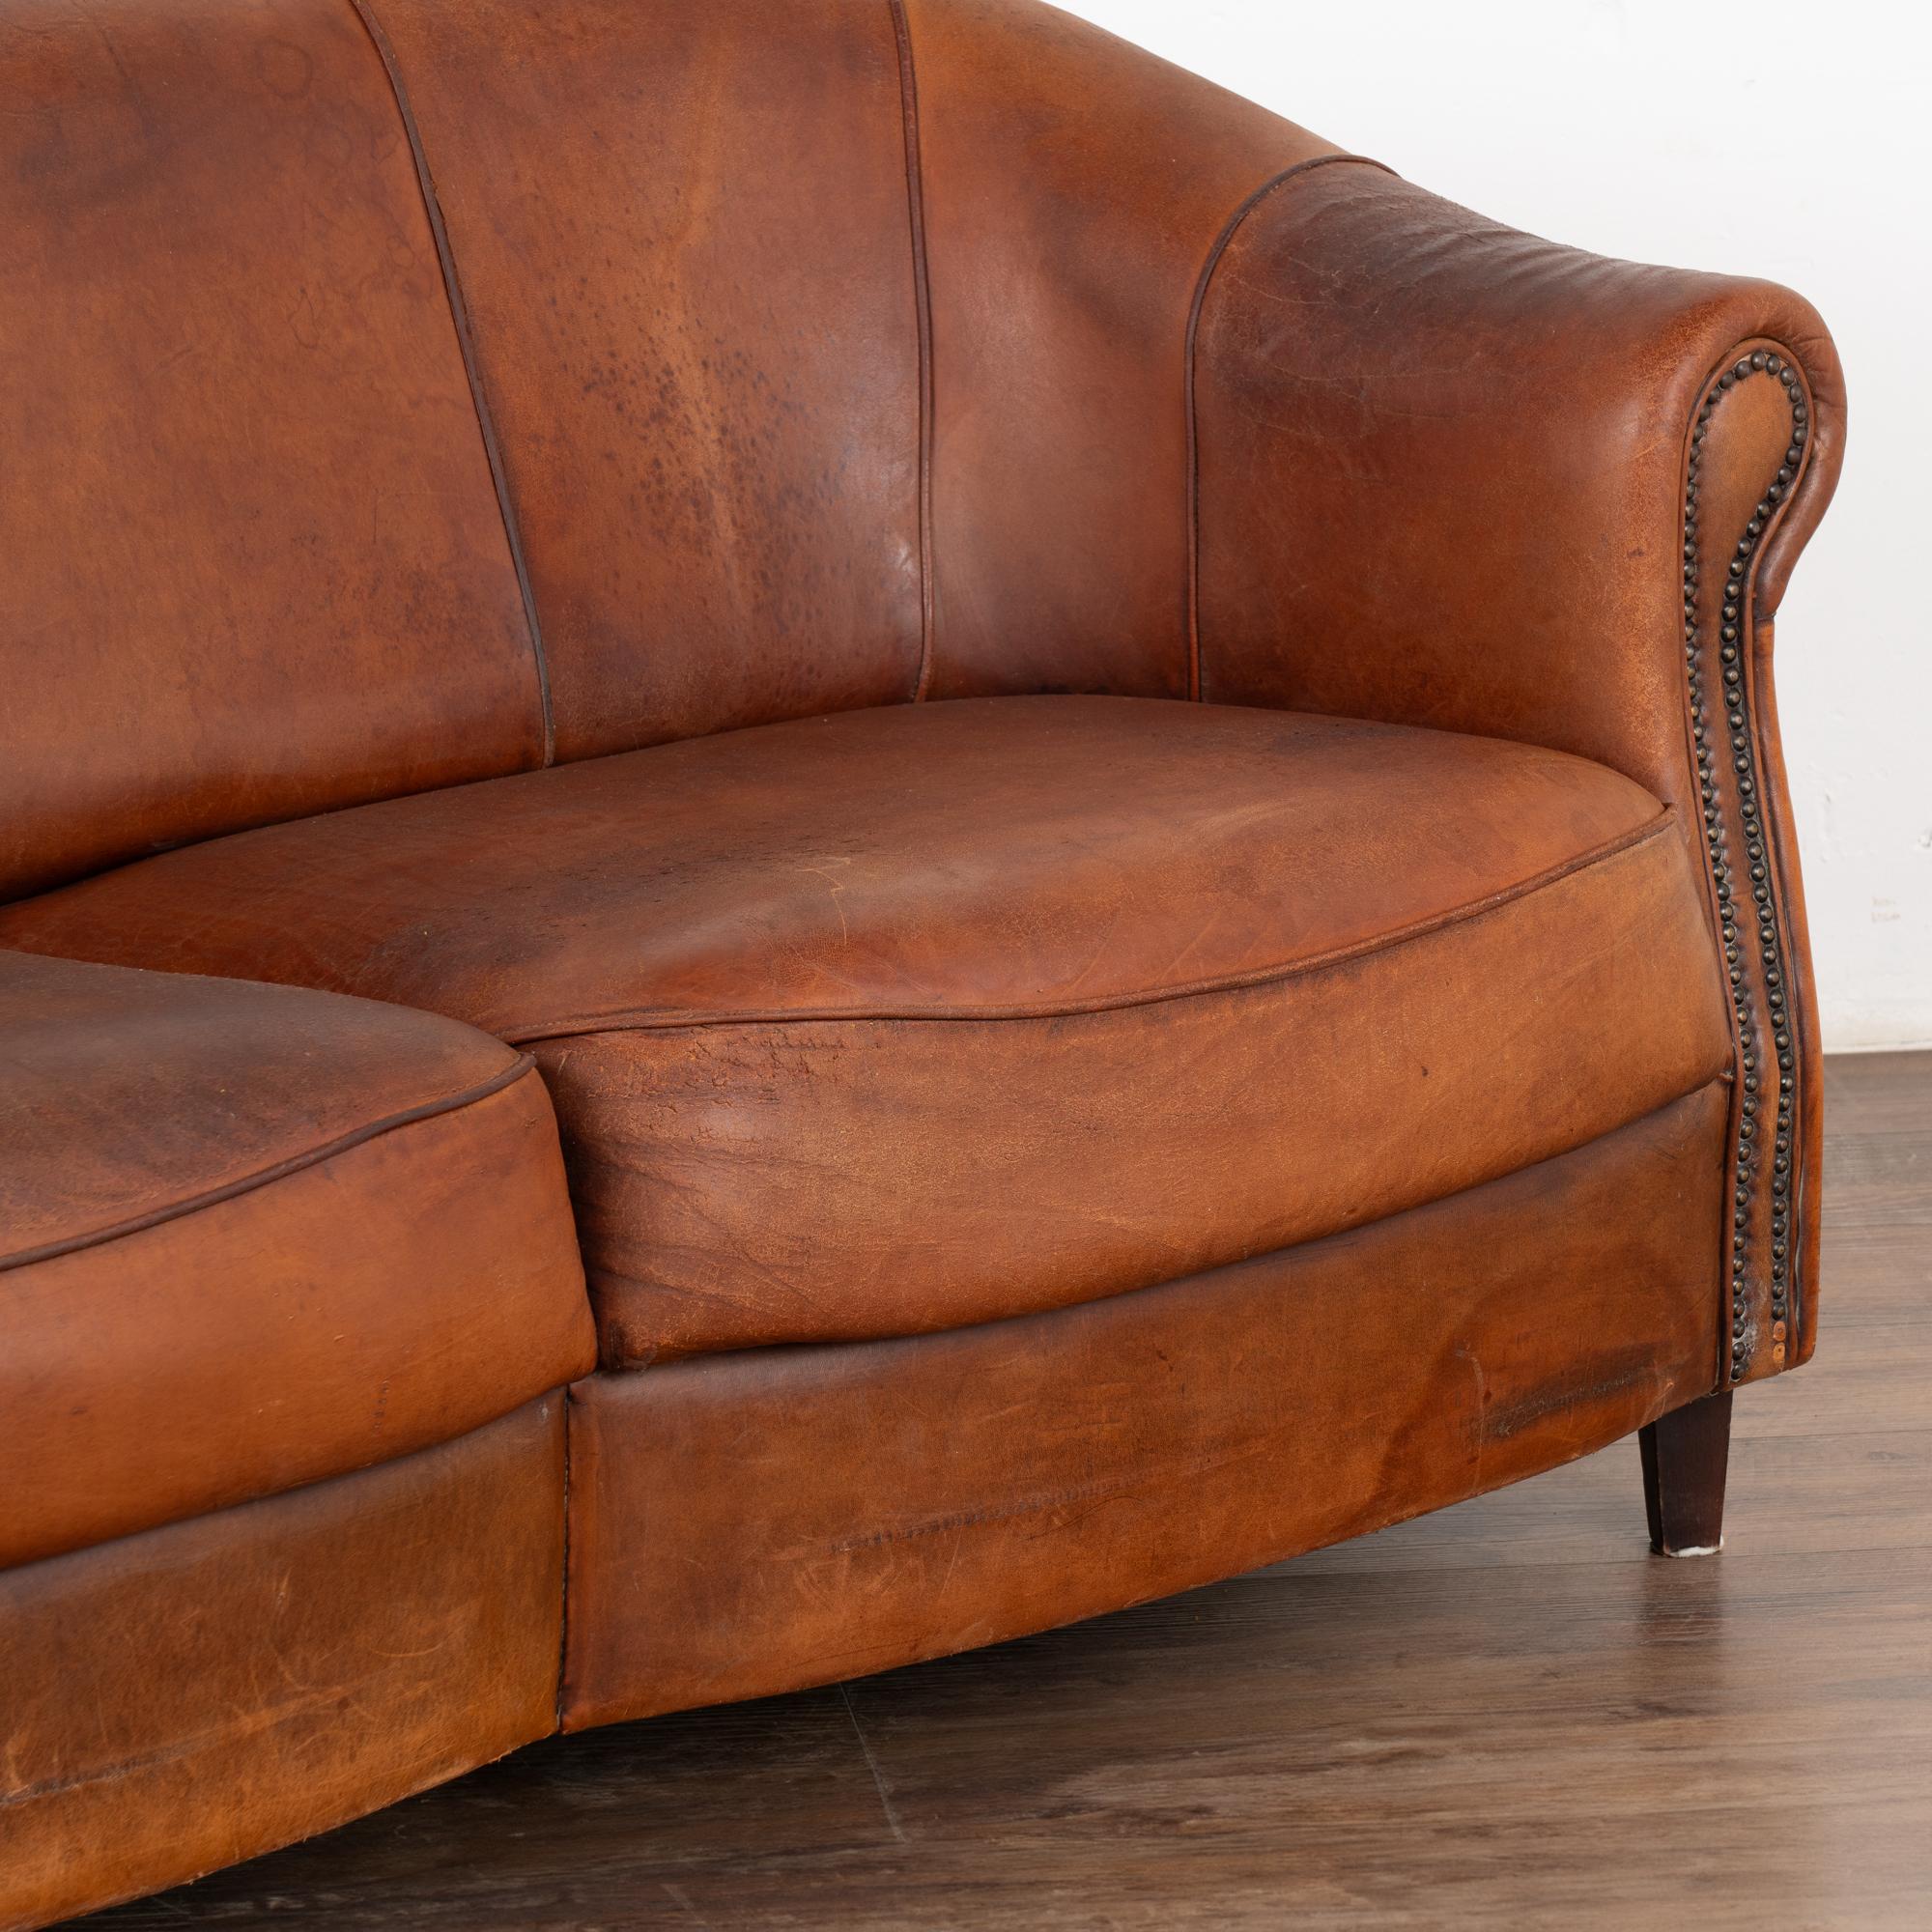 French Vintage Brown Leather Two Seat Sofa Loveseat, France circa 1920-40